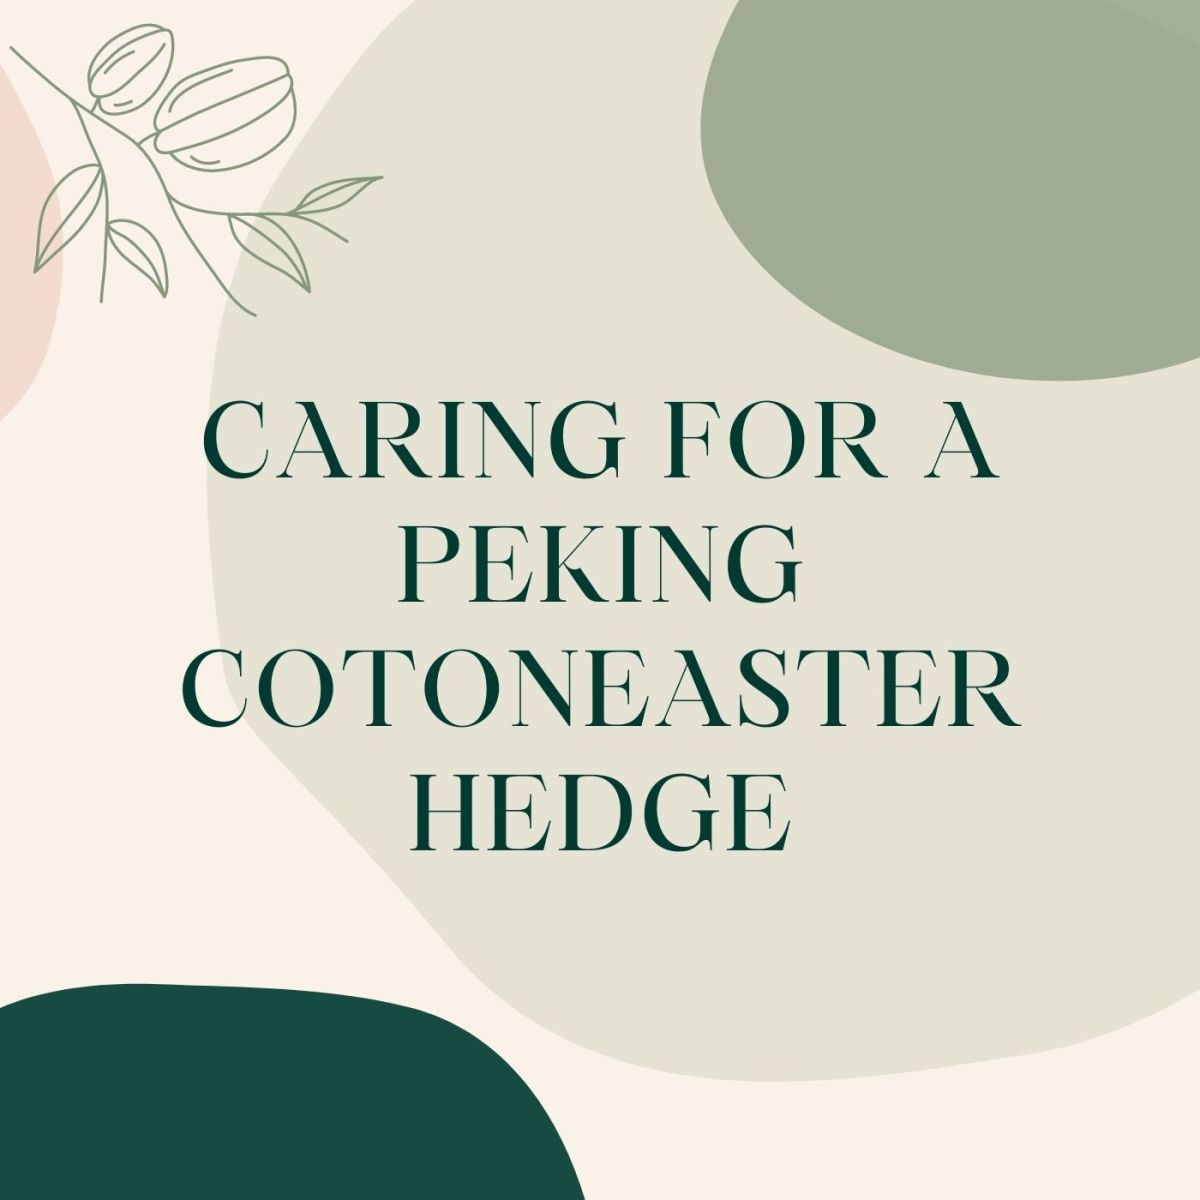 How to Care for a Peking Cotoneaster Hedge